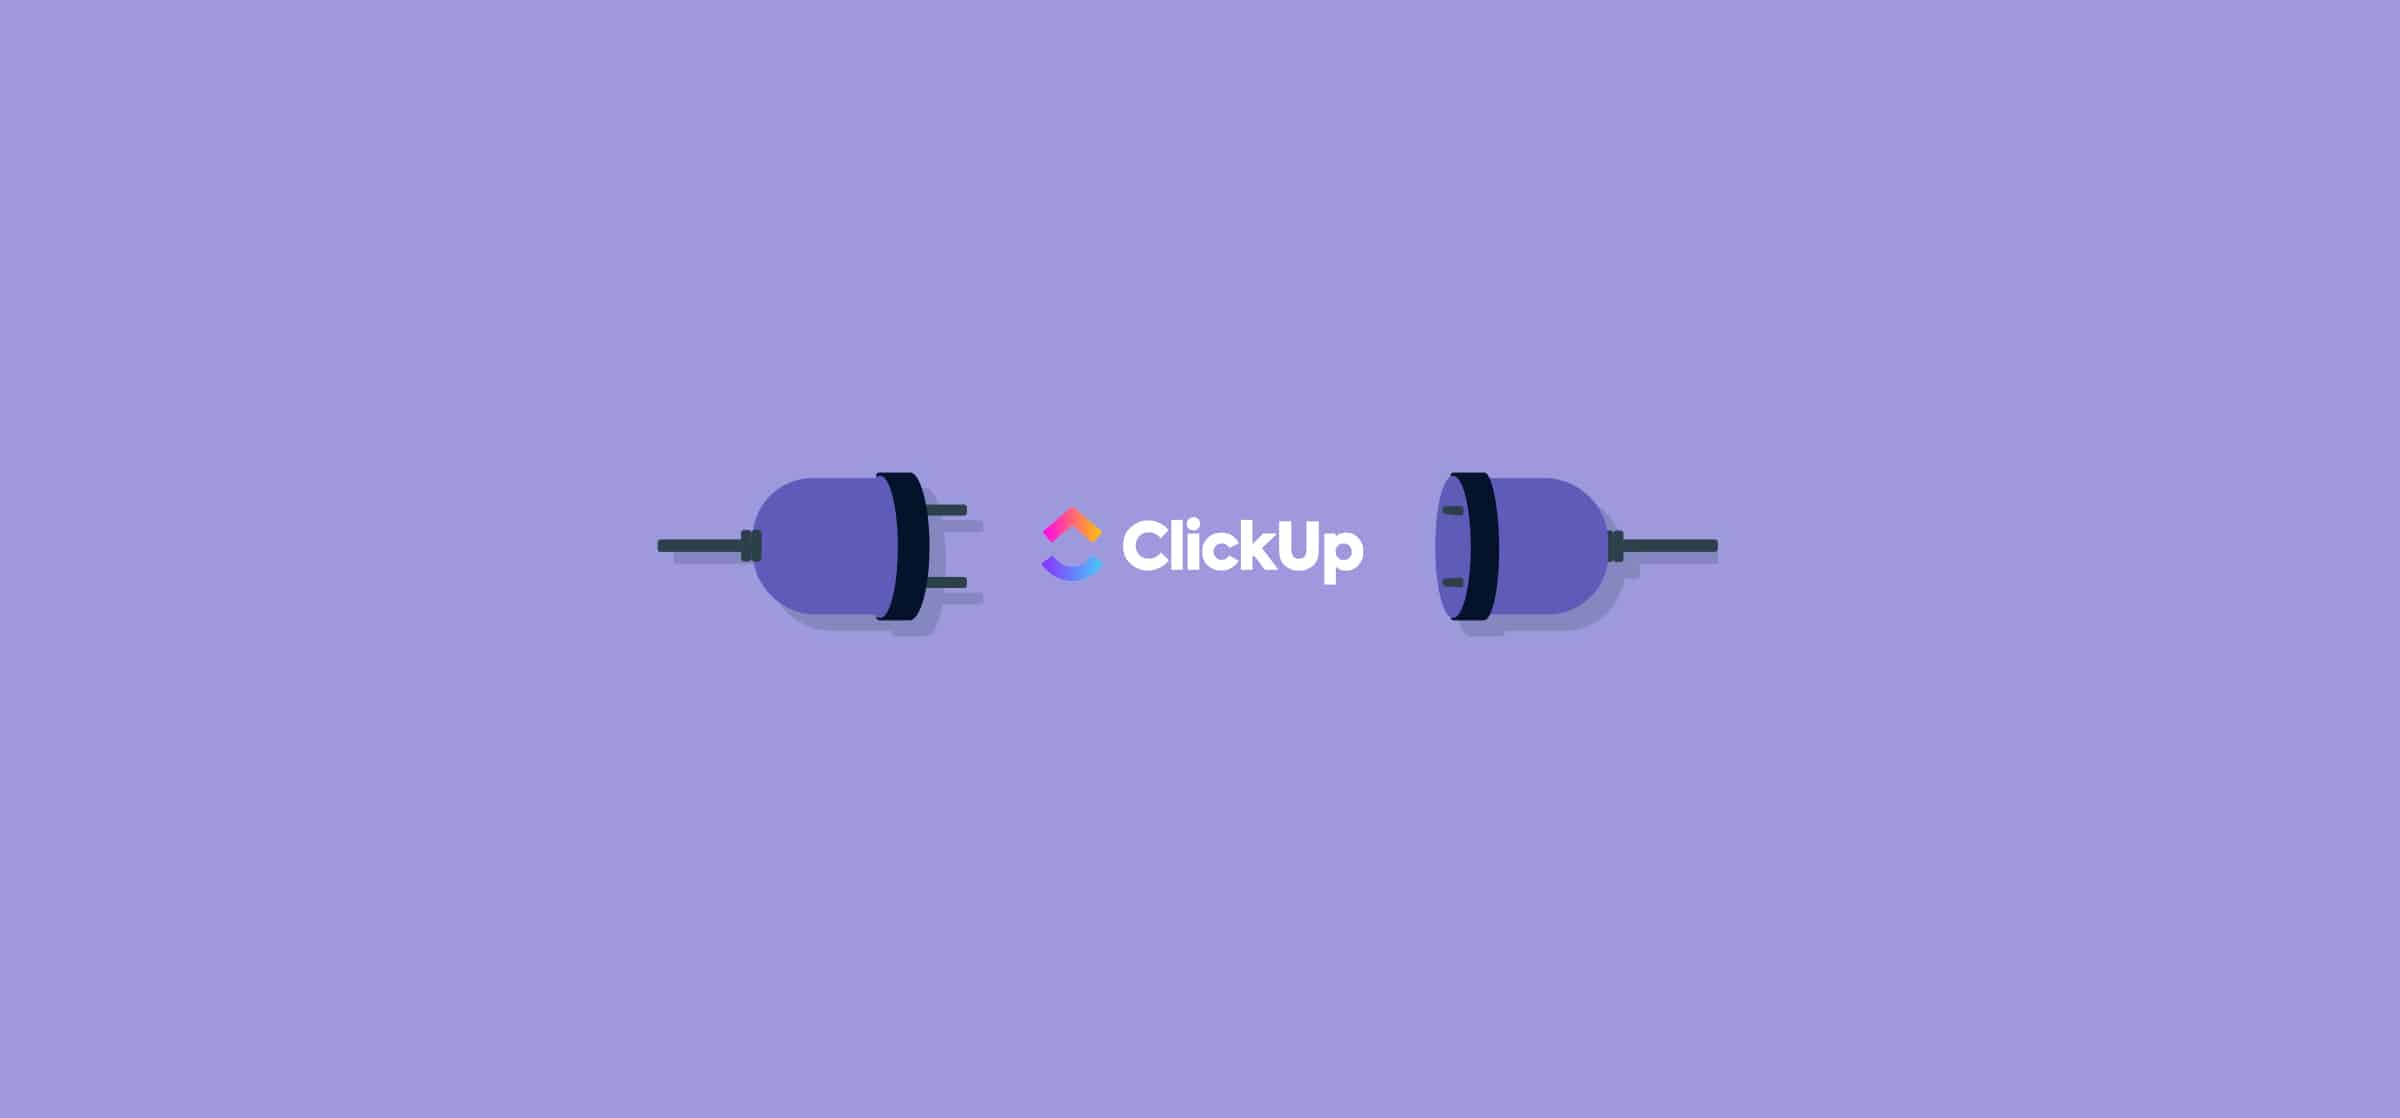 The ClickUp logo, between two electric plugs, representing ClickUp integrations.